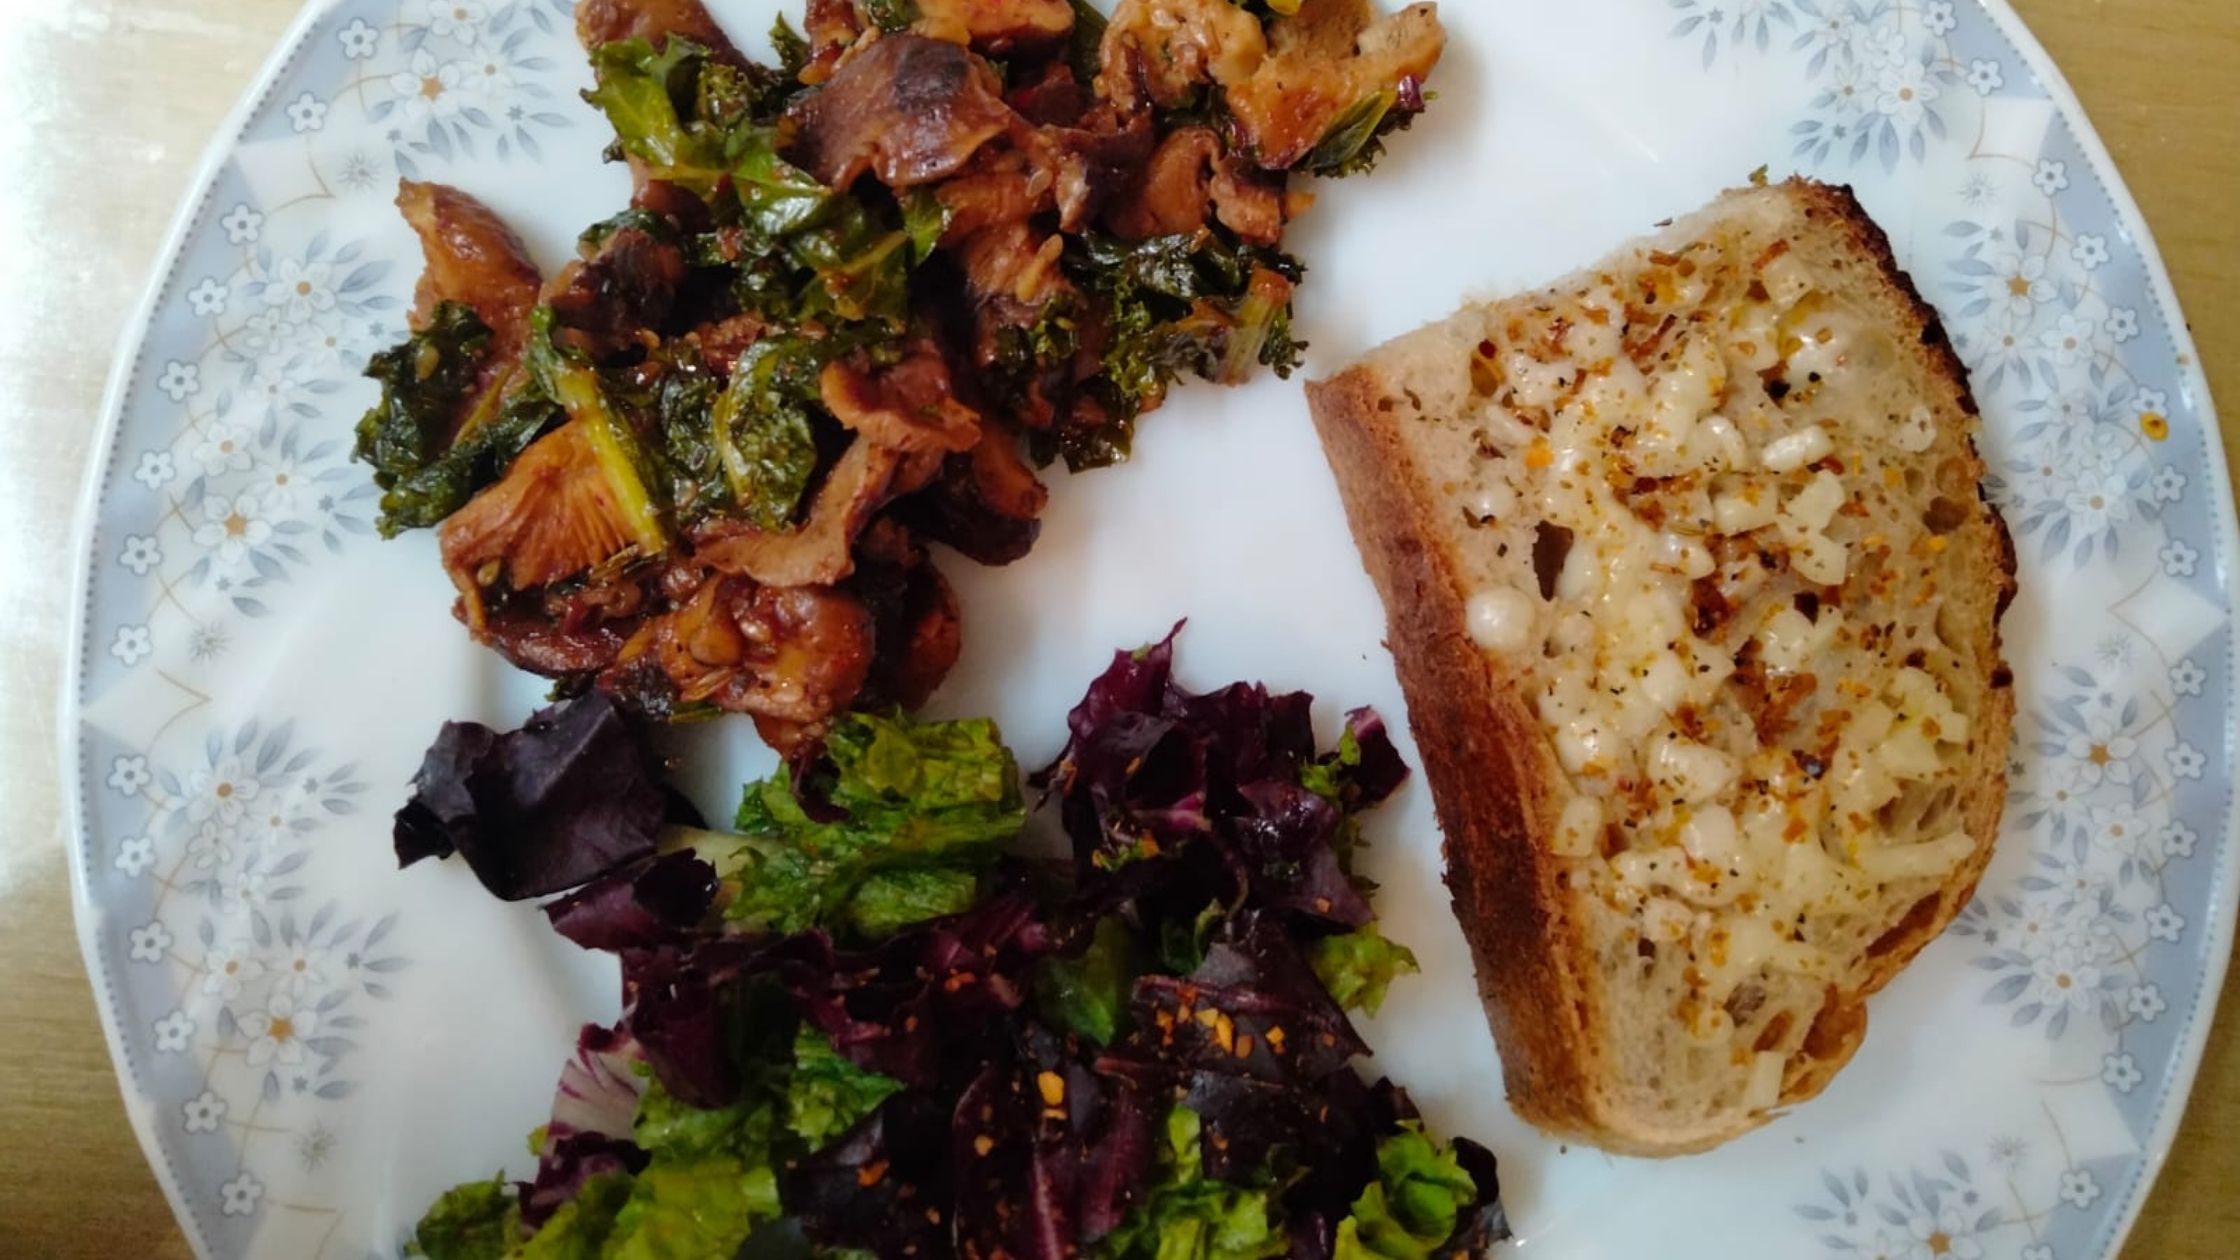 Cheese Toast with Mixed Salad Leaves and Slow Cooked Oyster Mushrooms with Kale Leaves